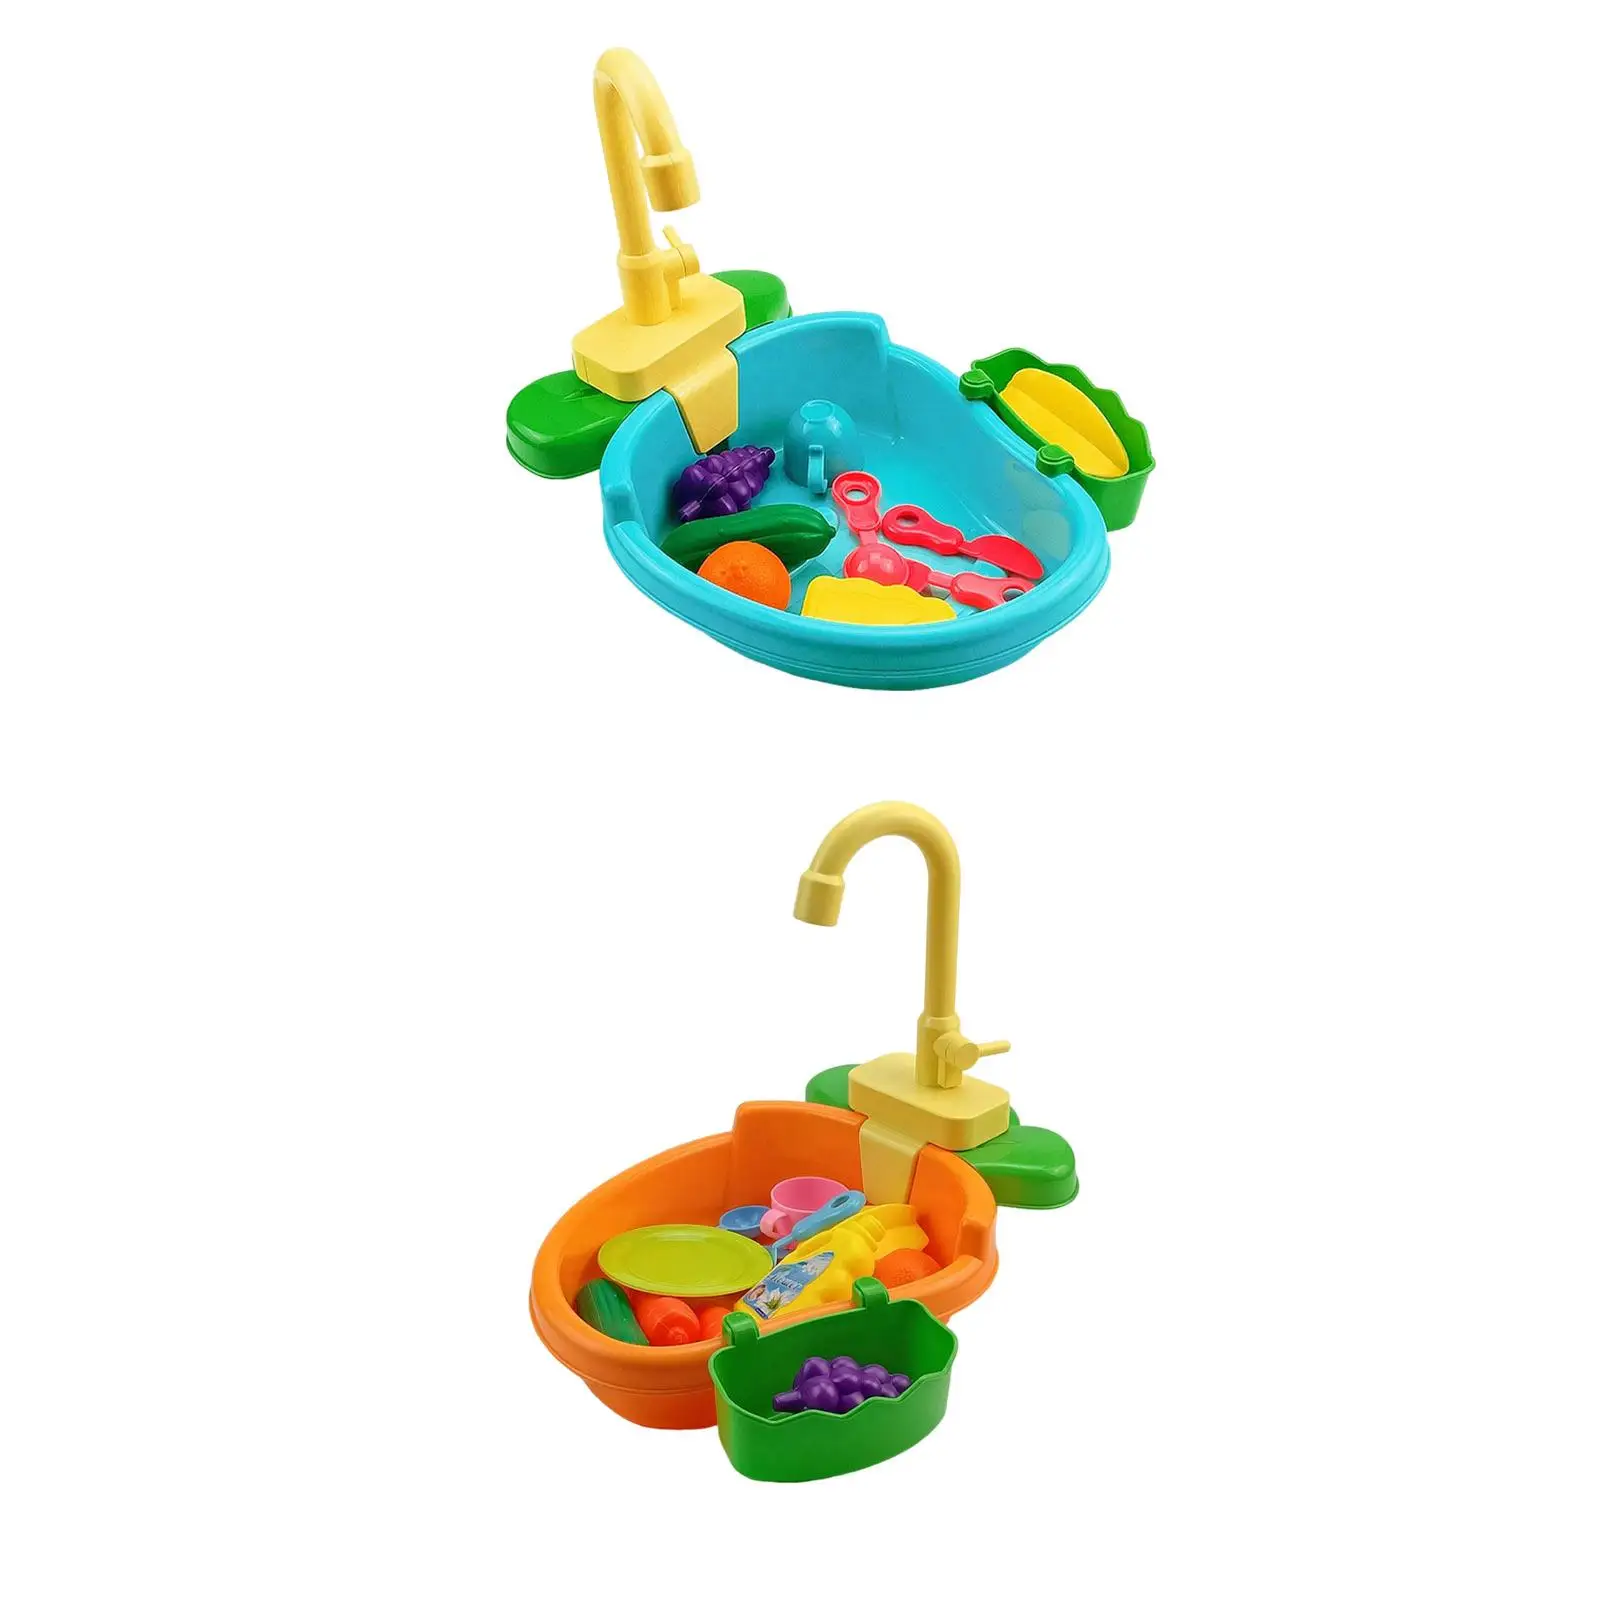 Kitchen Sink Toy Running Plastic Playing Role Food Pans Childern